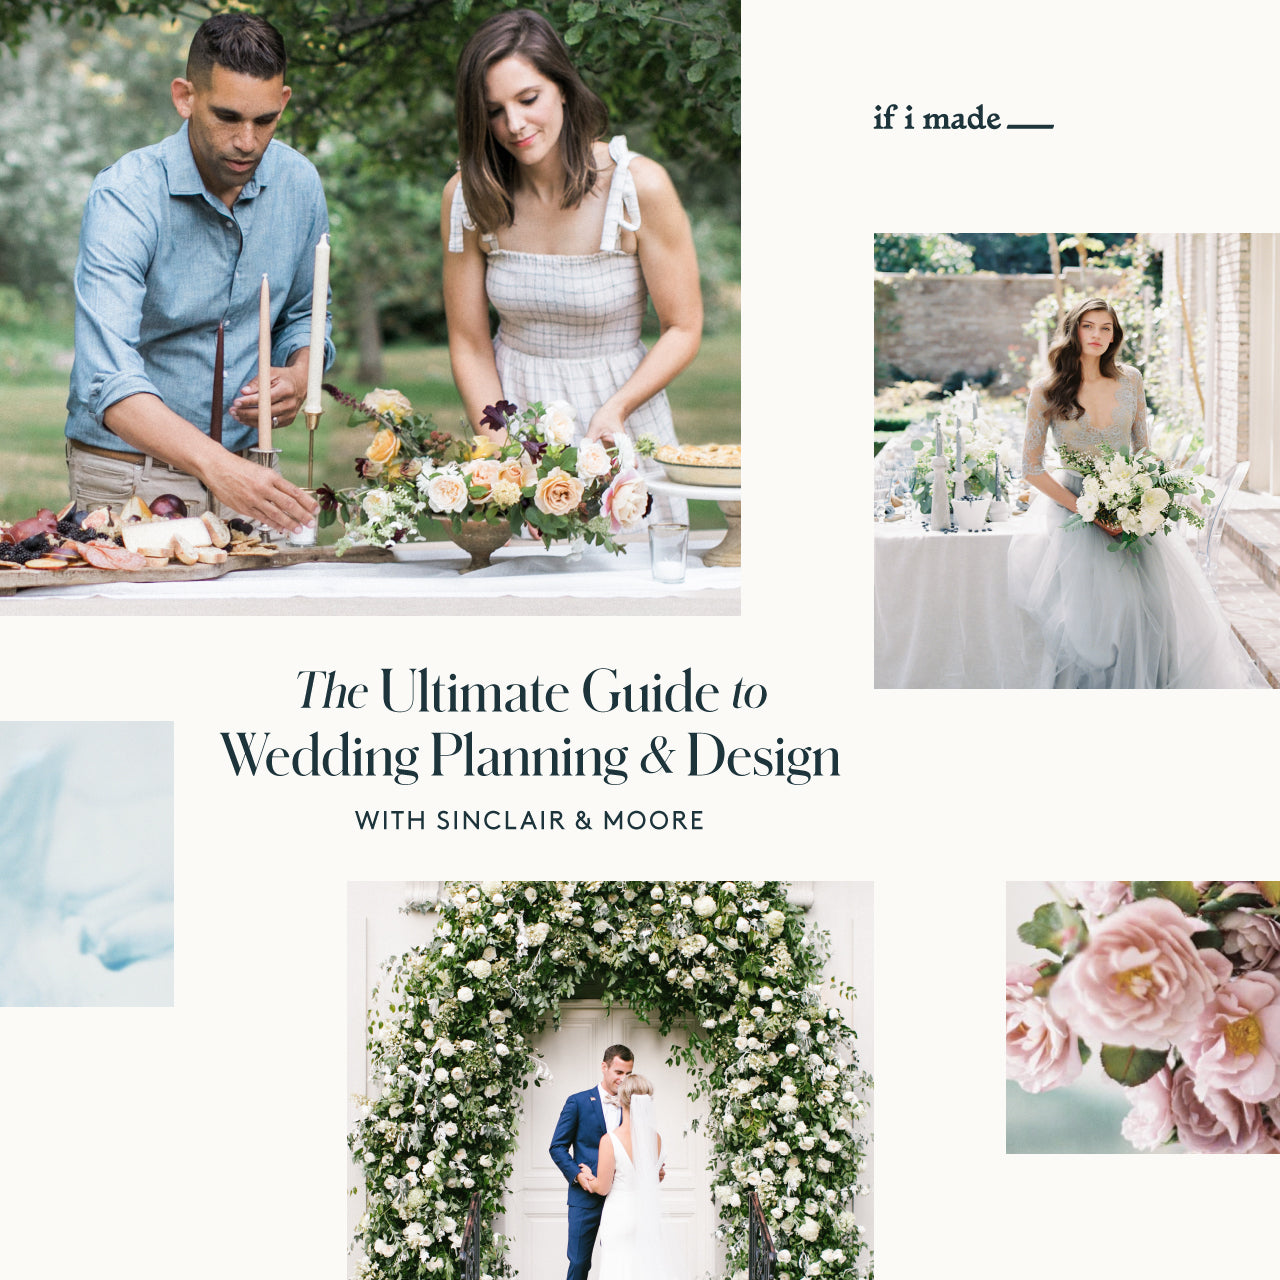 The Ultimate Guide to Wedding Planning & Design with Sinclair & Moore (SPP0822) -  19 payments of $99